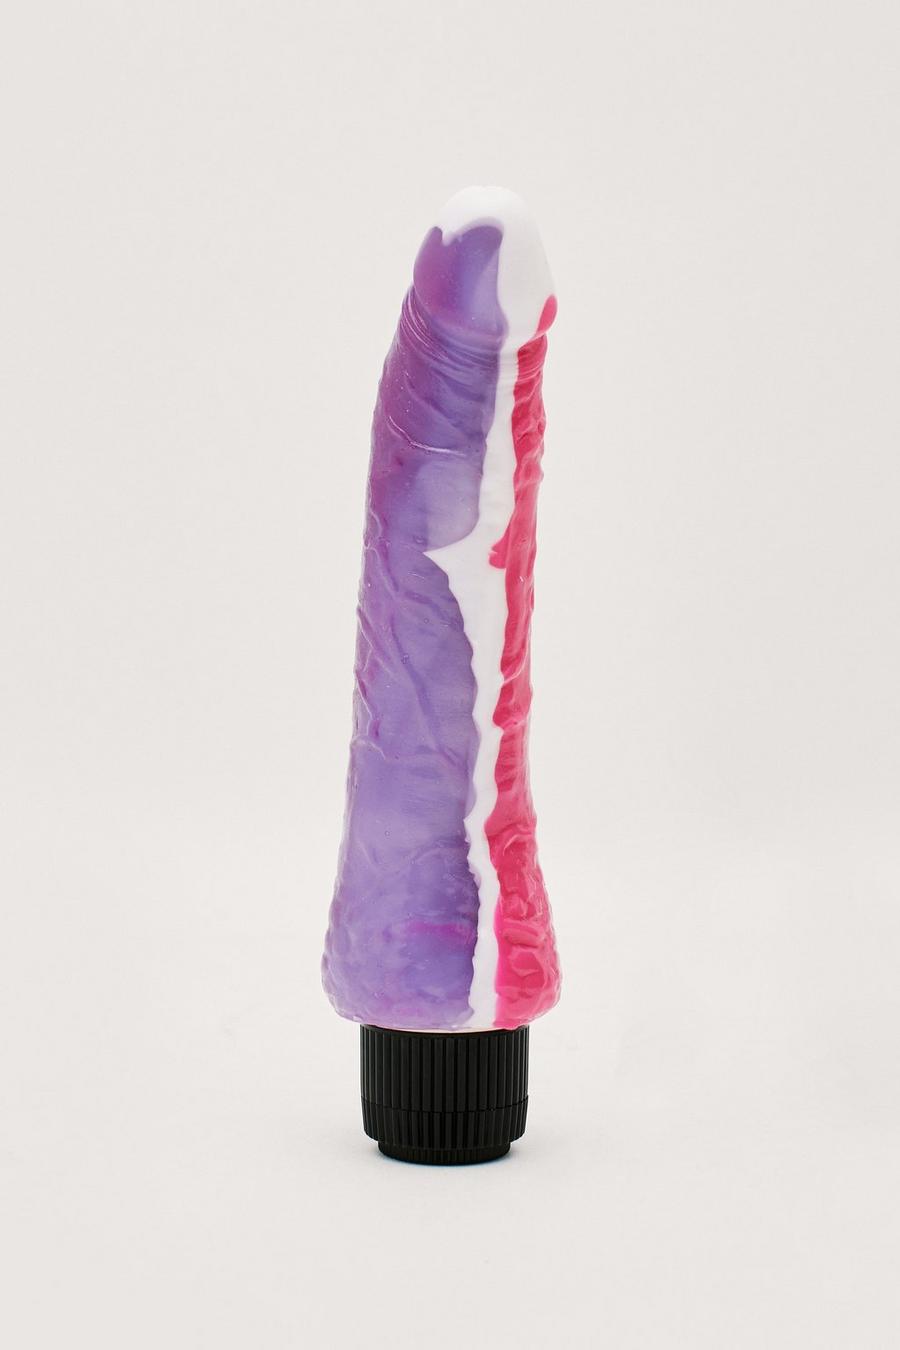 Funky Jelly Curved Vibrator